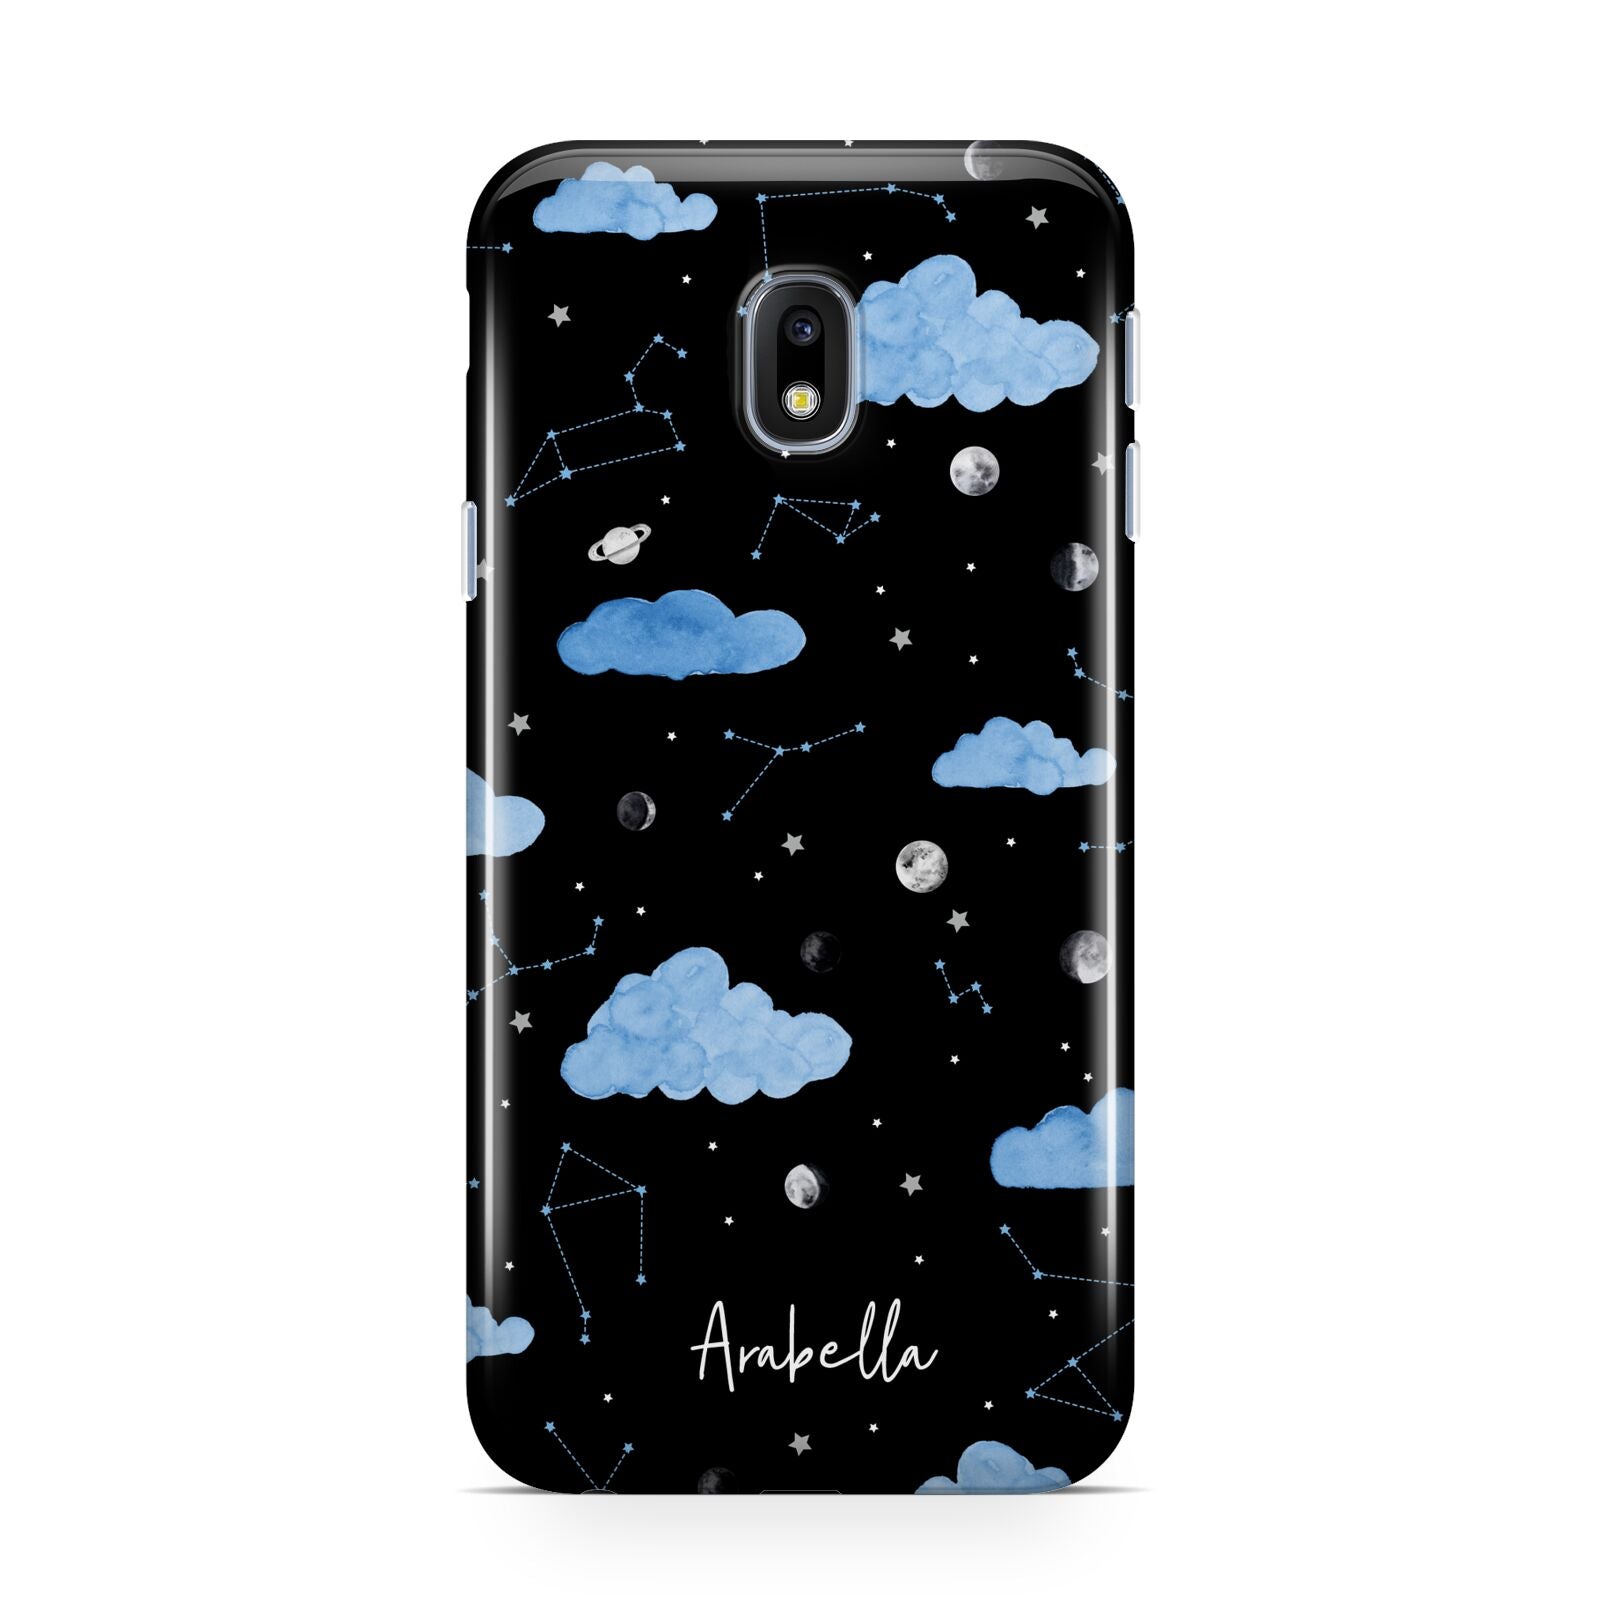 Cloudy Night Sky with Name Samsung Galaxy J3 2017 Case